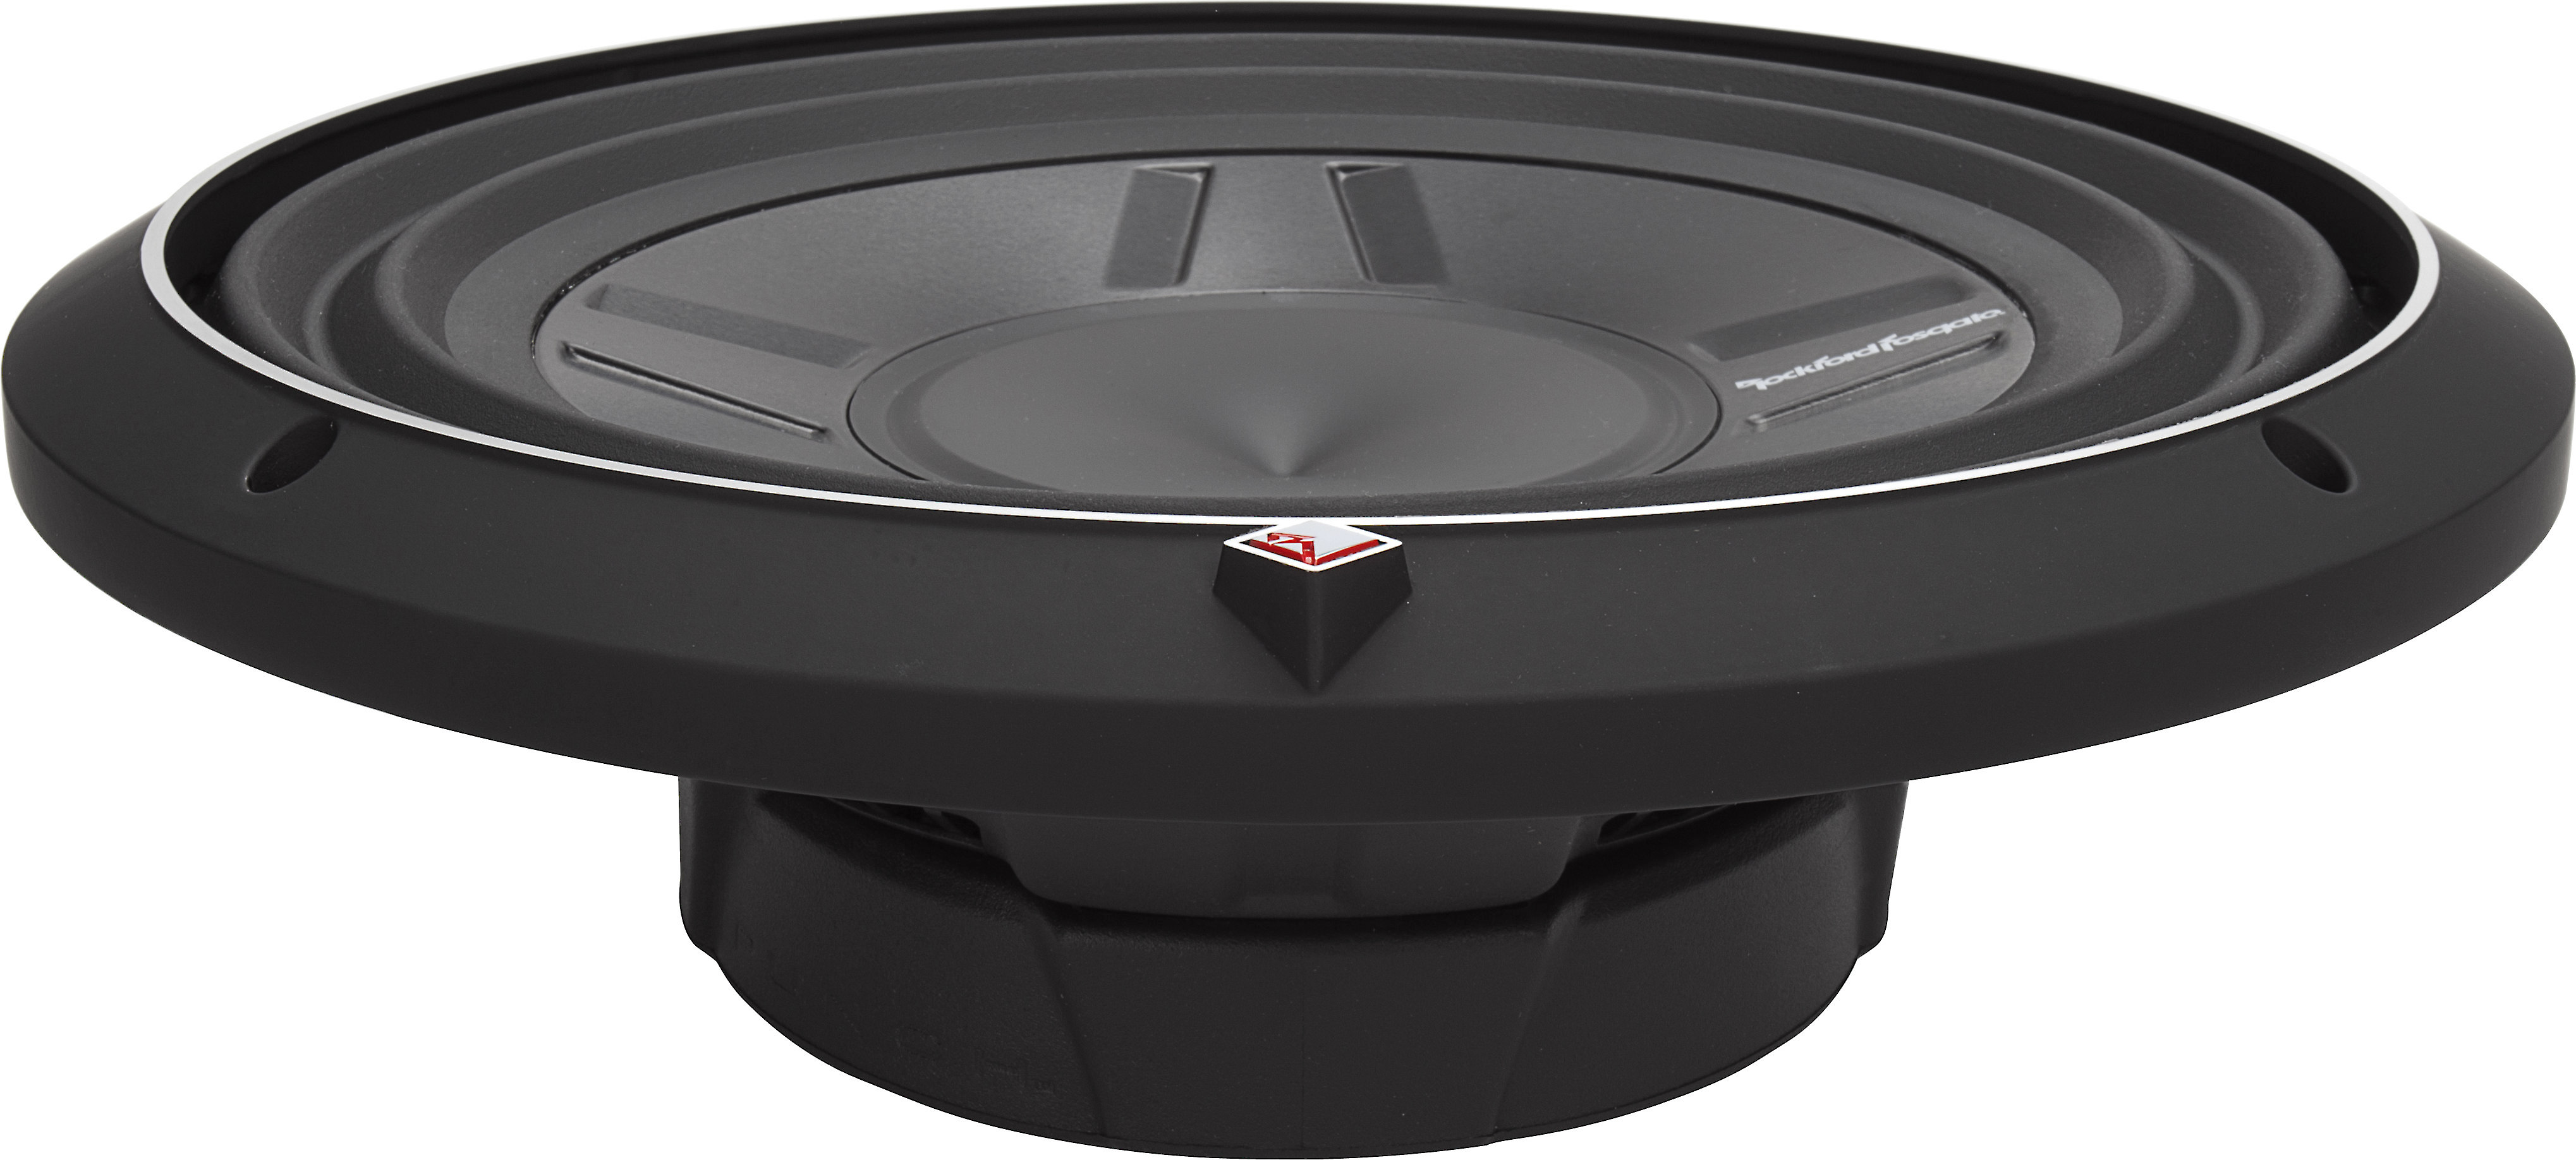 Rockford Fosgate P3SD4-12 Punch Stage 3 